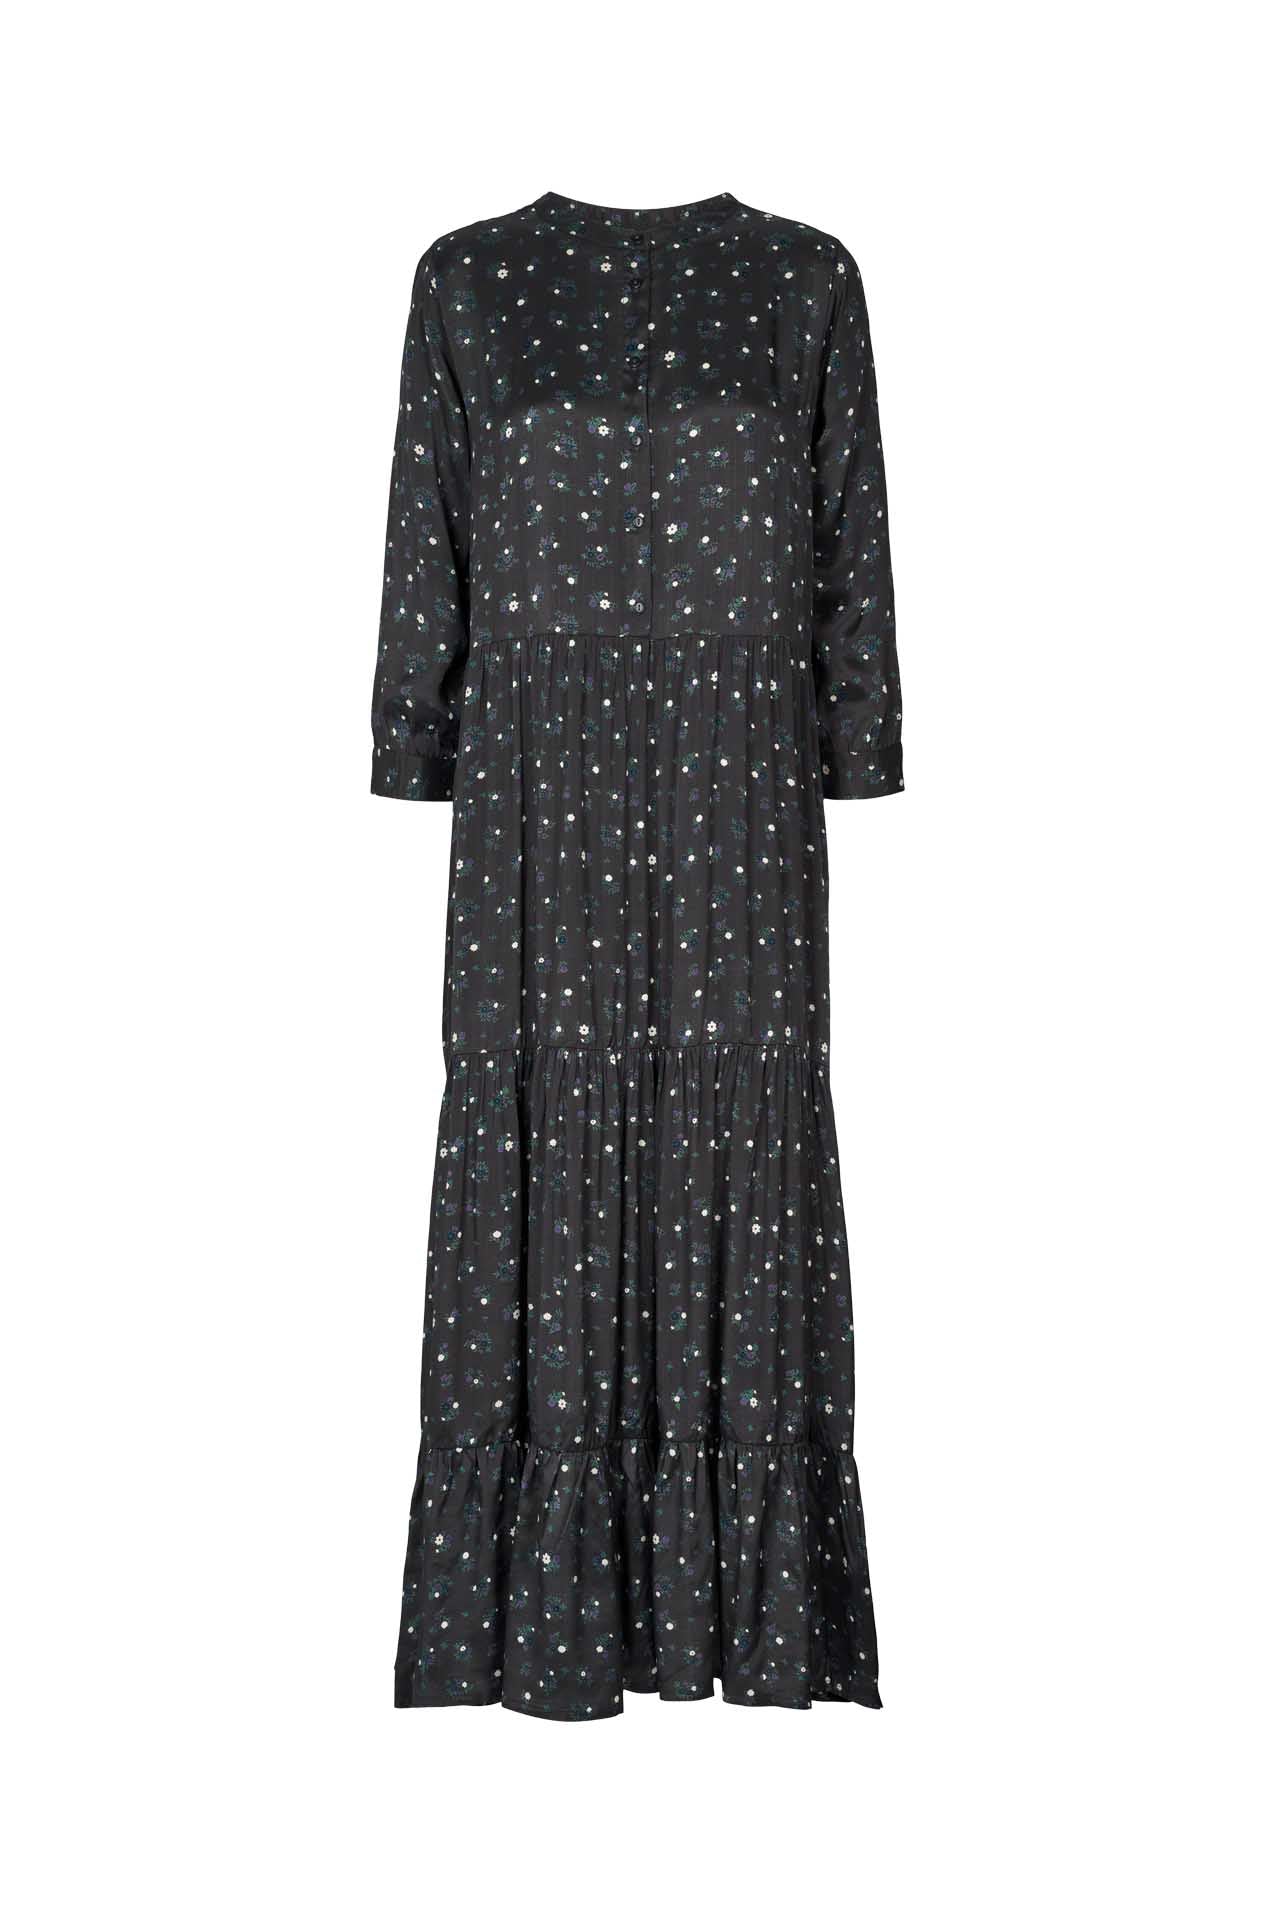 Lollys Laundry - Nee Dress Washed Black